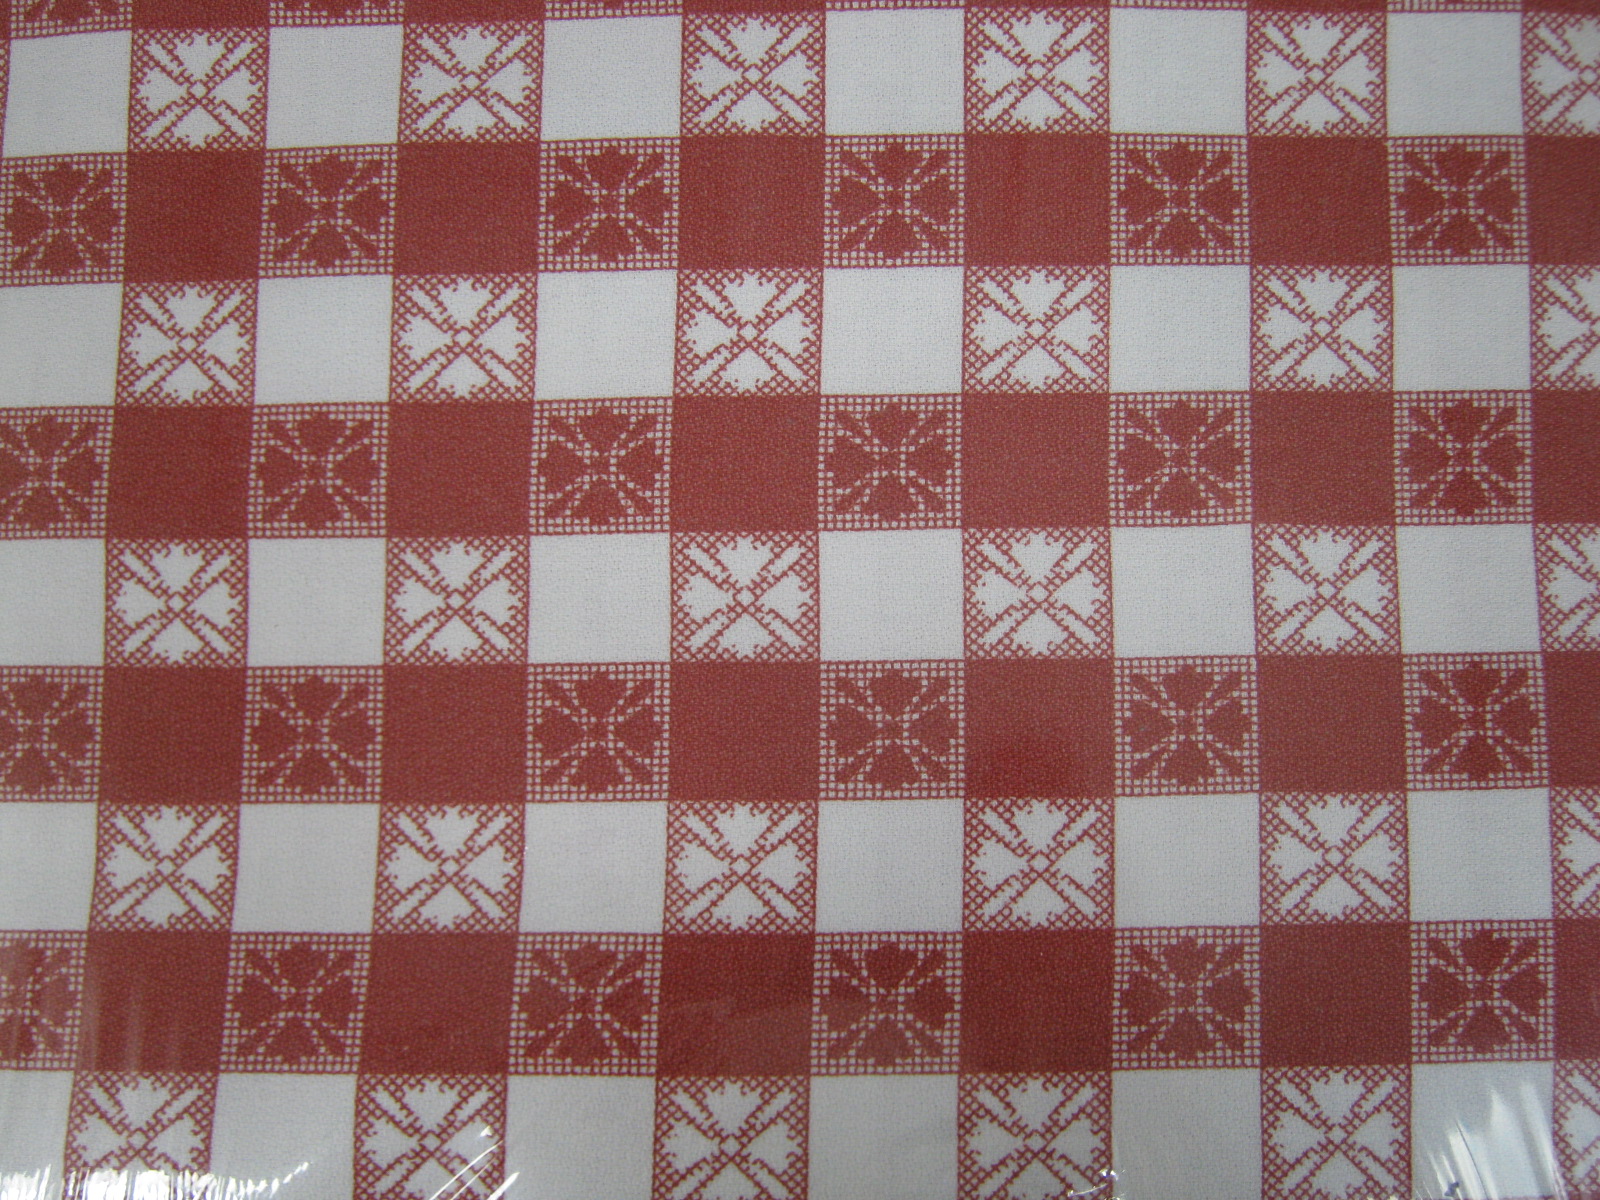 10 Square 54" Tablecloths Red White Checkered Linens Picnic Catering Restaurant 3